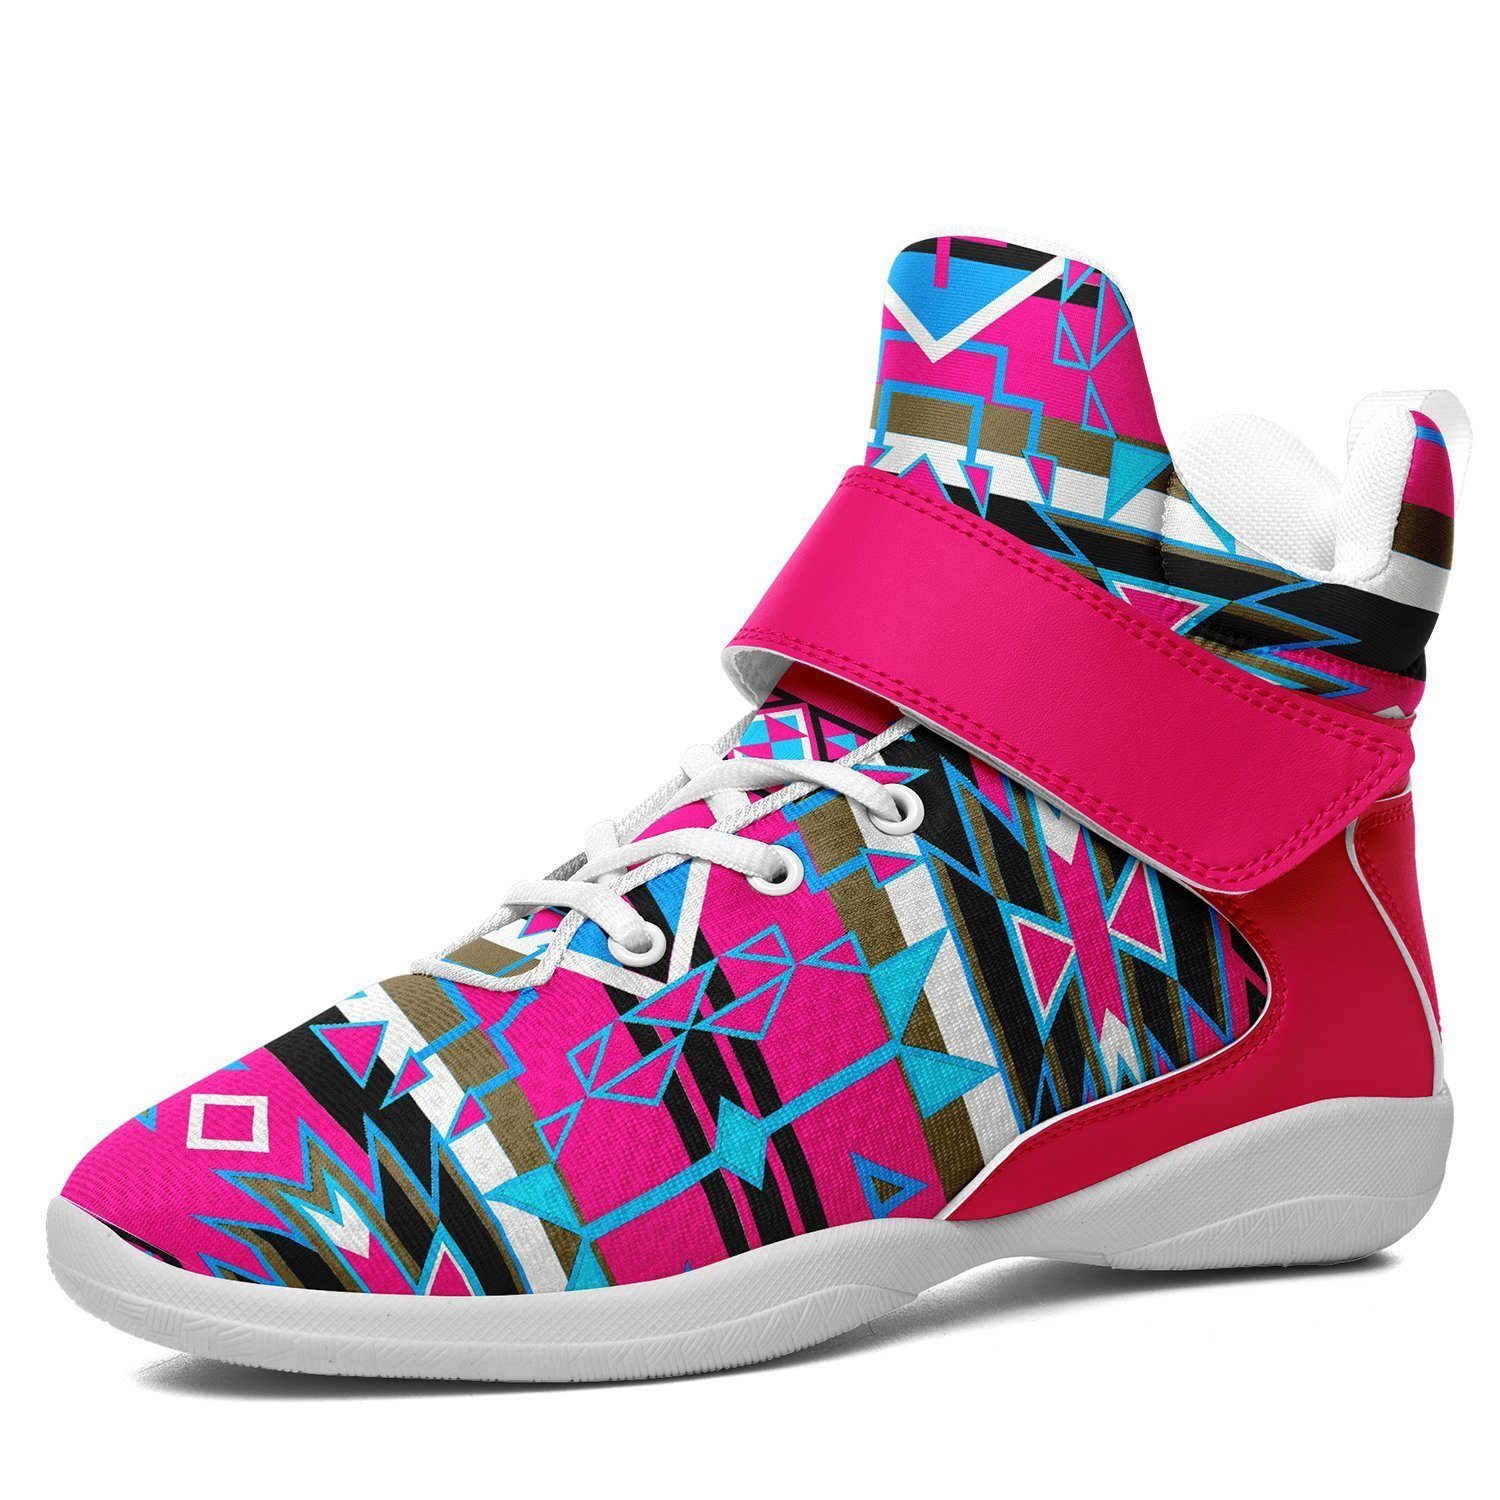 Force of Nature Sunset Storm Ipottaa Basketball / Sport High Top Shoes - White Sole 49 Dzine US Men 7 / EUR 40 White Sole with Pink Strap 